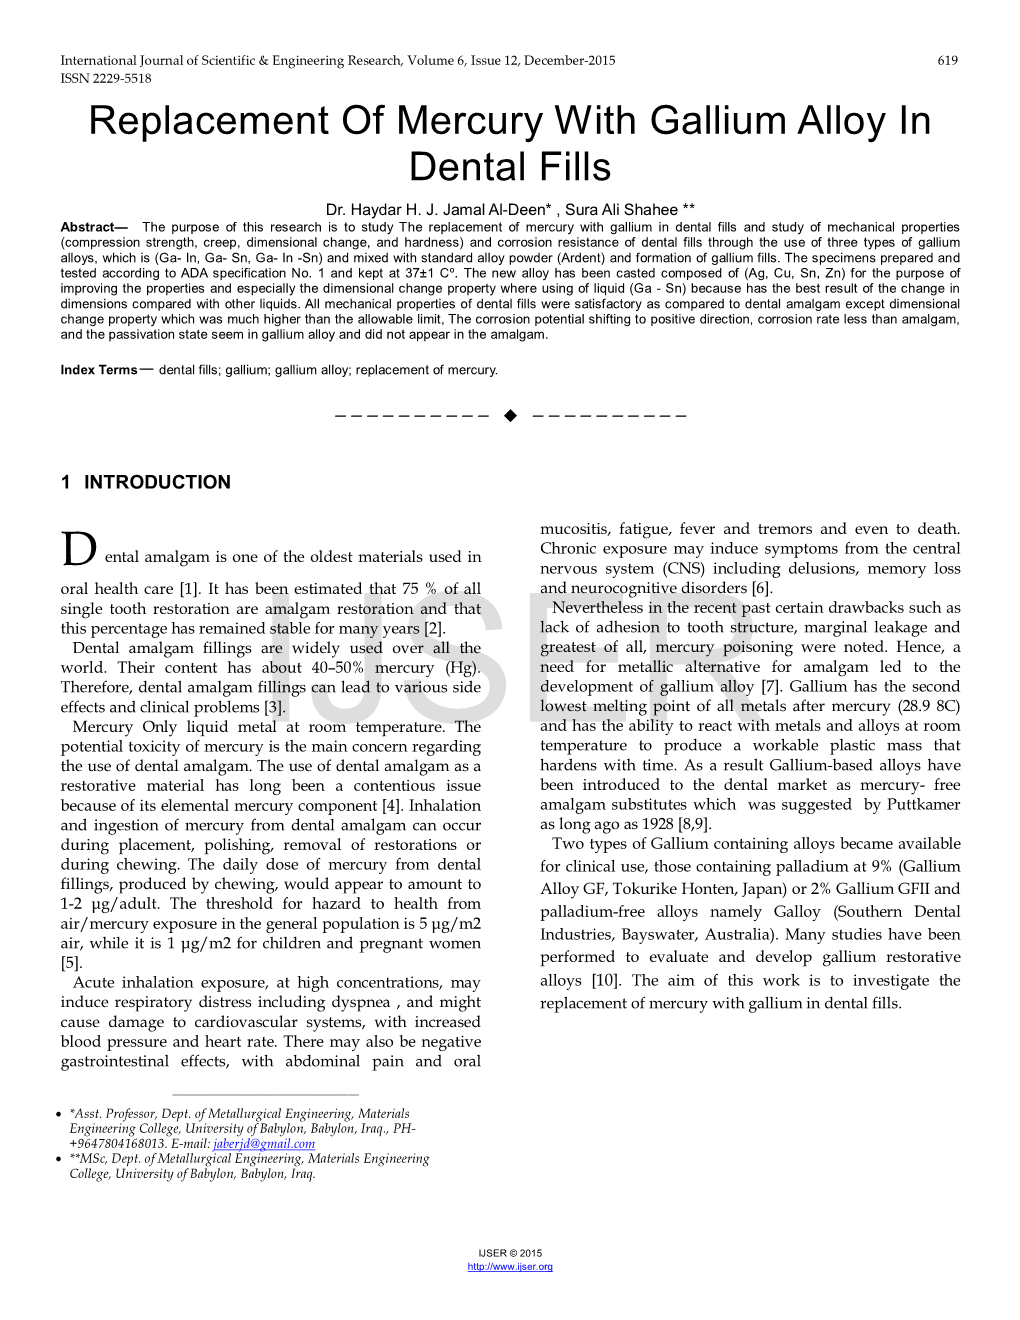 Replacement of Mercury with Gallium Alloy in Dental Fills Dr